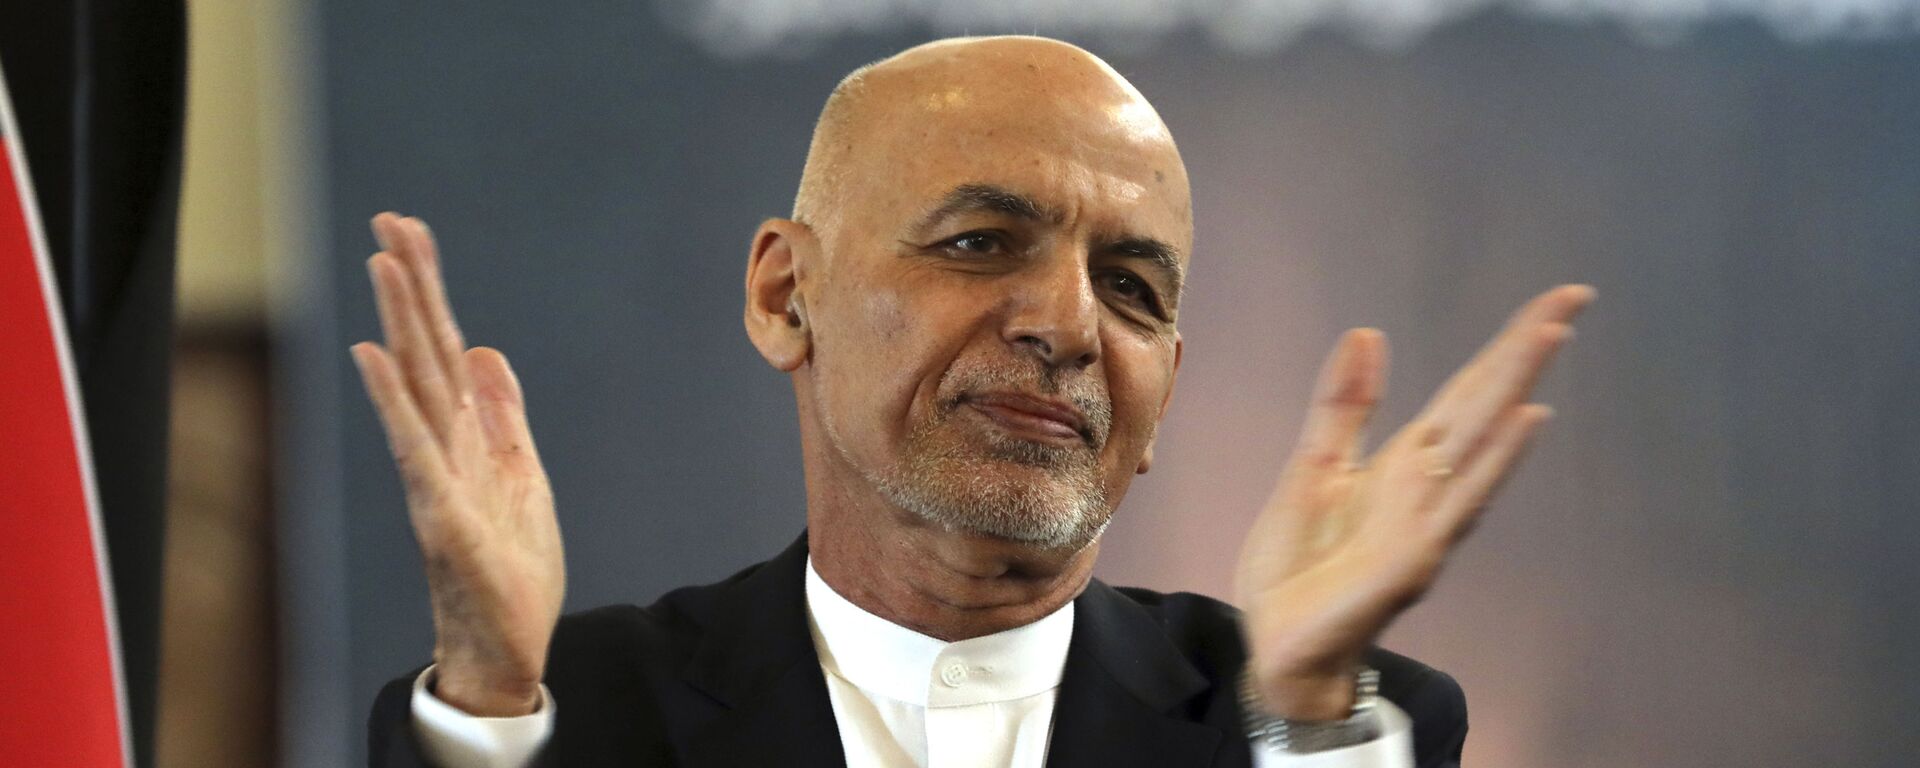 FILE - In this March 21, 2021 file photo, Afghan President Ashraf Ghani speaks during a ceremony celebrating the Persian New Year, Nowruz at the presidential palace in Kabul, Afghanistan. Afghanistan’s embattled president left the country Sunday, Aug. 15, 2021, joining his fellow citizens and foreigners in a stampede fleeing the advancing Taliban and signaling the end of a 20-year Western experiment aimed at remaking Afghanistan.  - Sputnik International, 1920